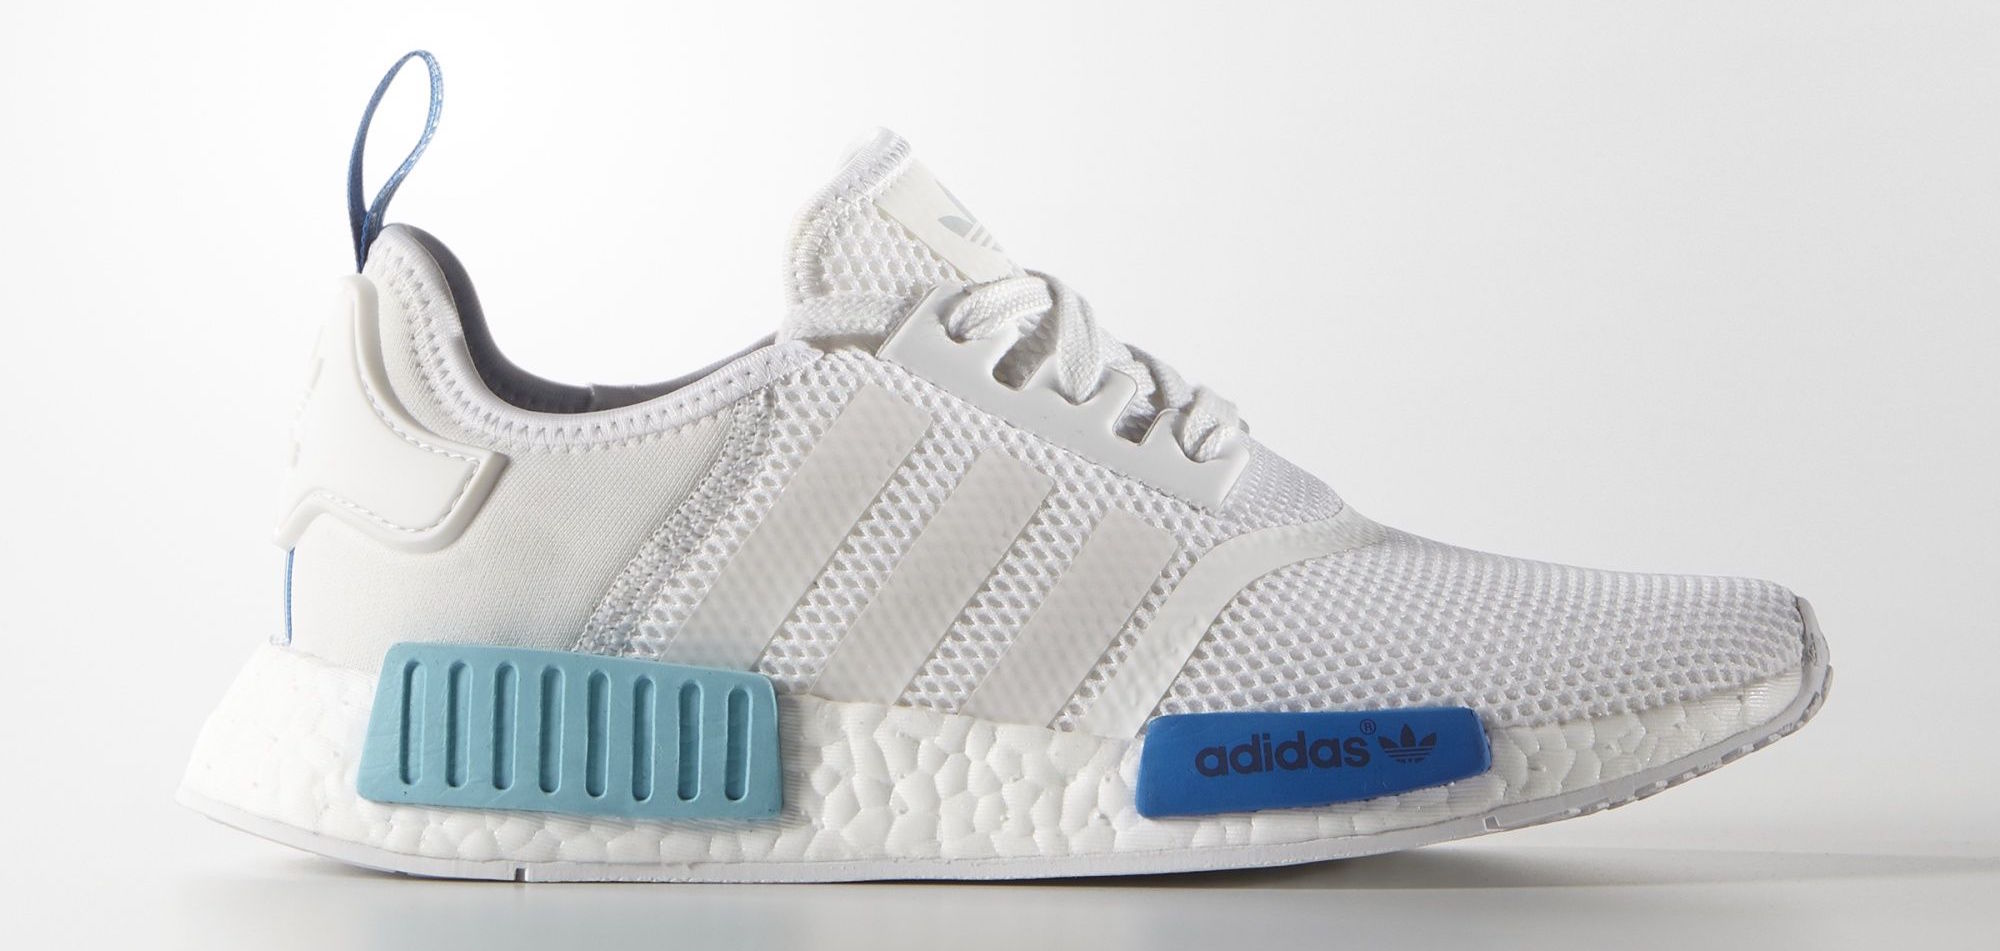 adidas nmd womens blue and white